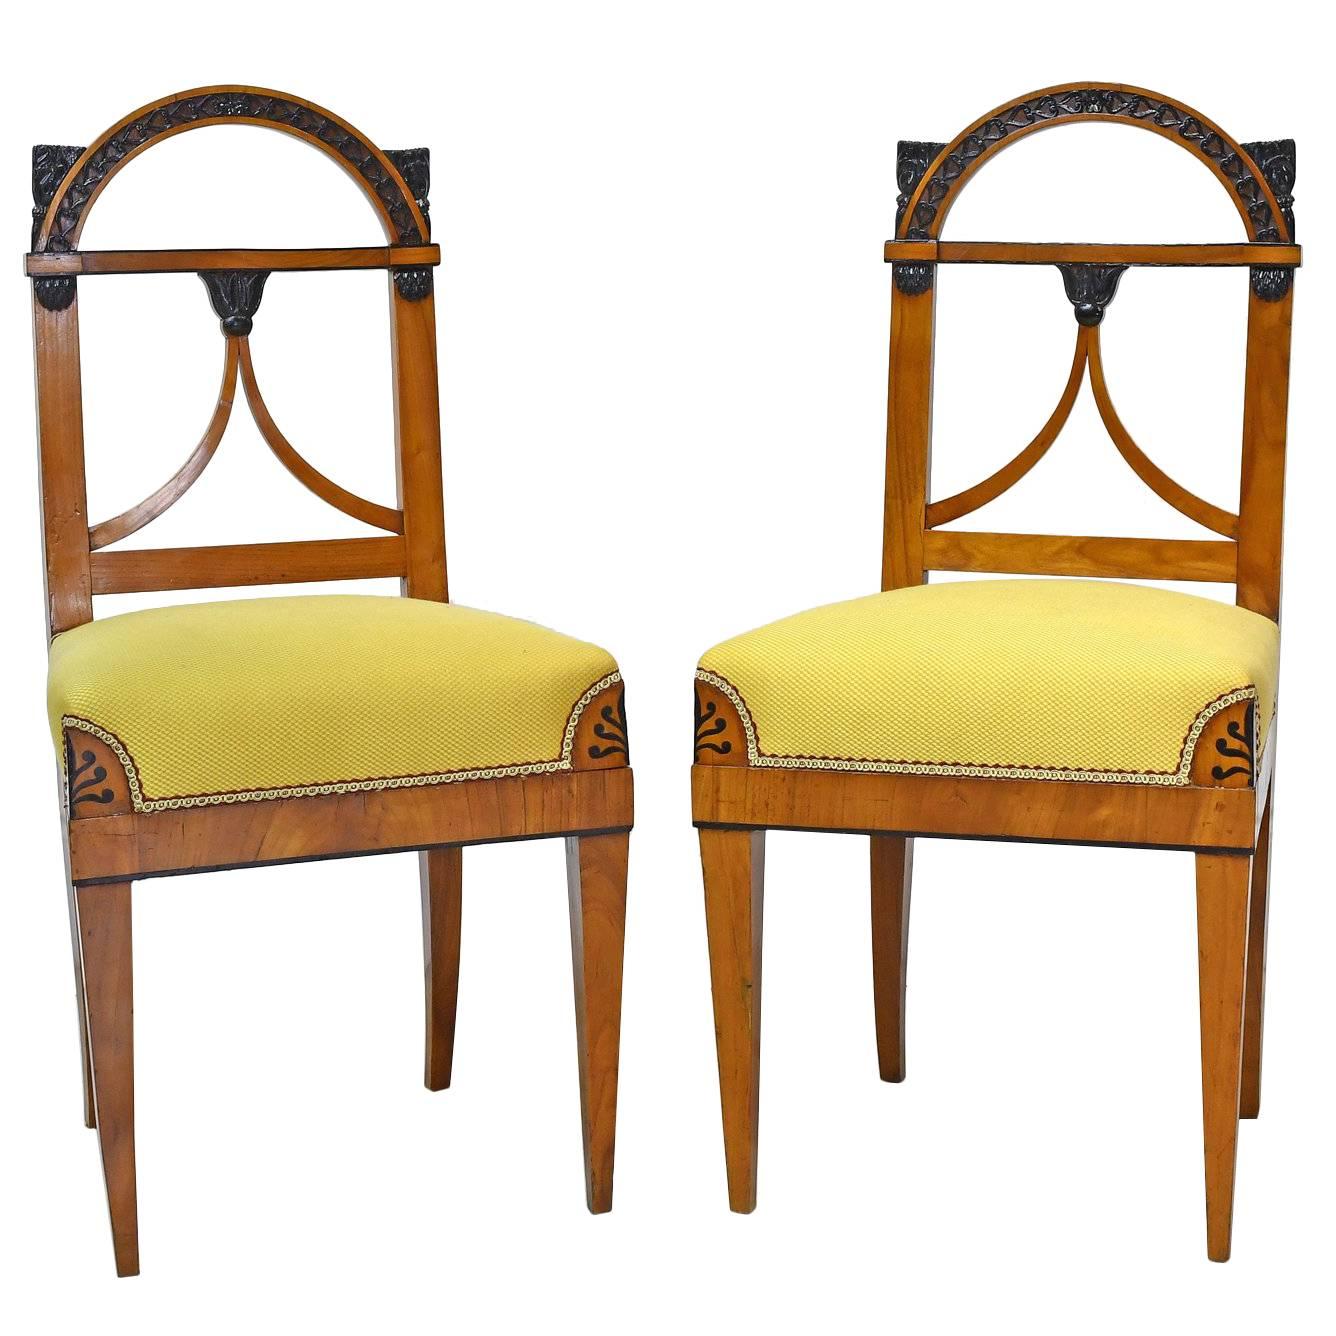 Pair of North German Neoclassical Empire Cherry Wood Side Chairs, circa 1815